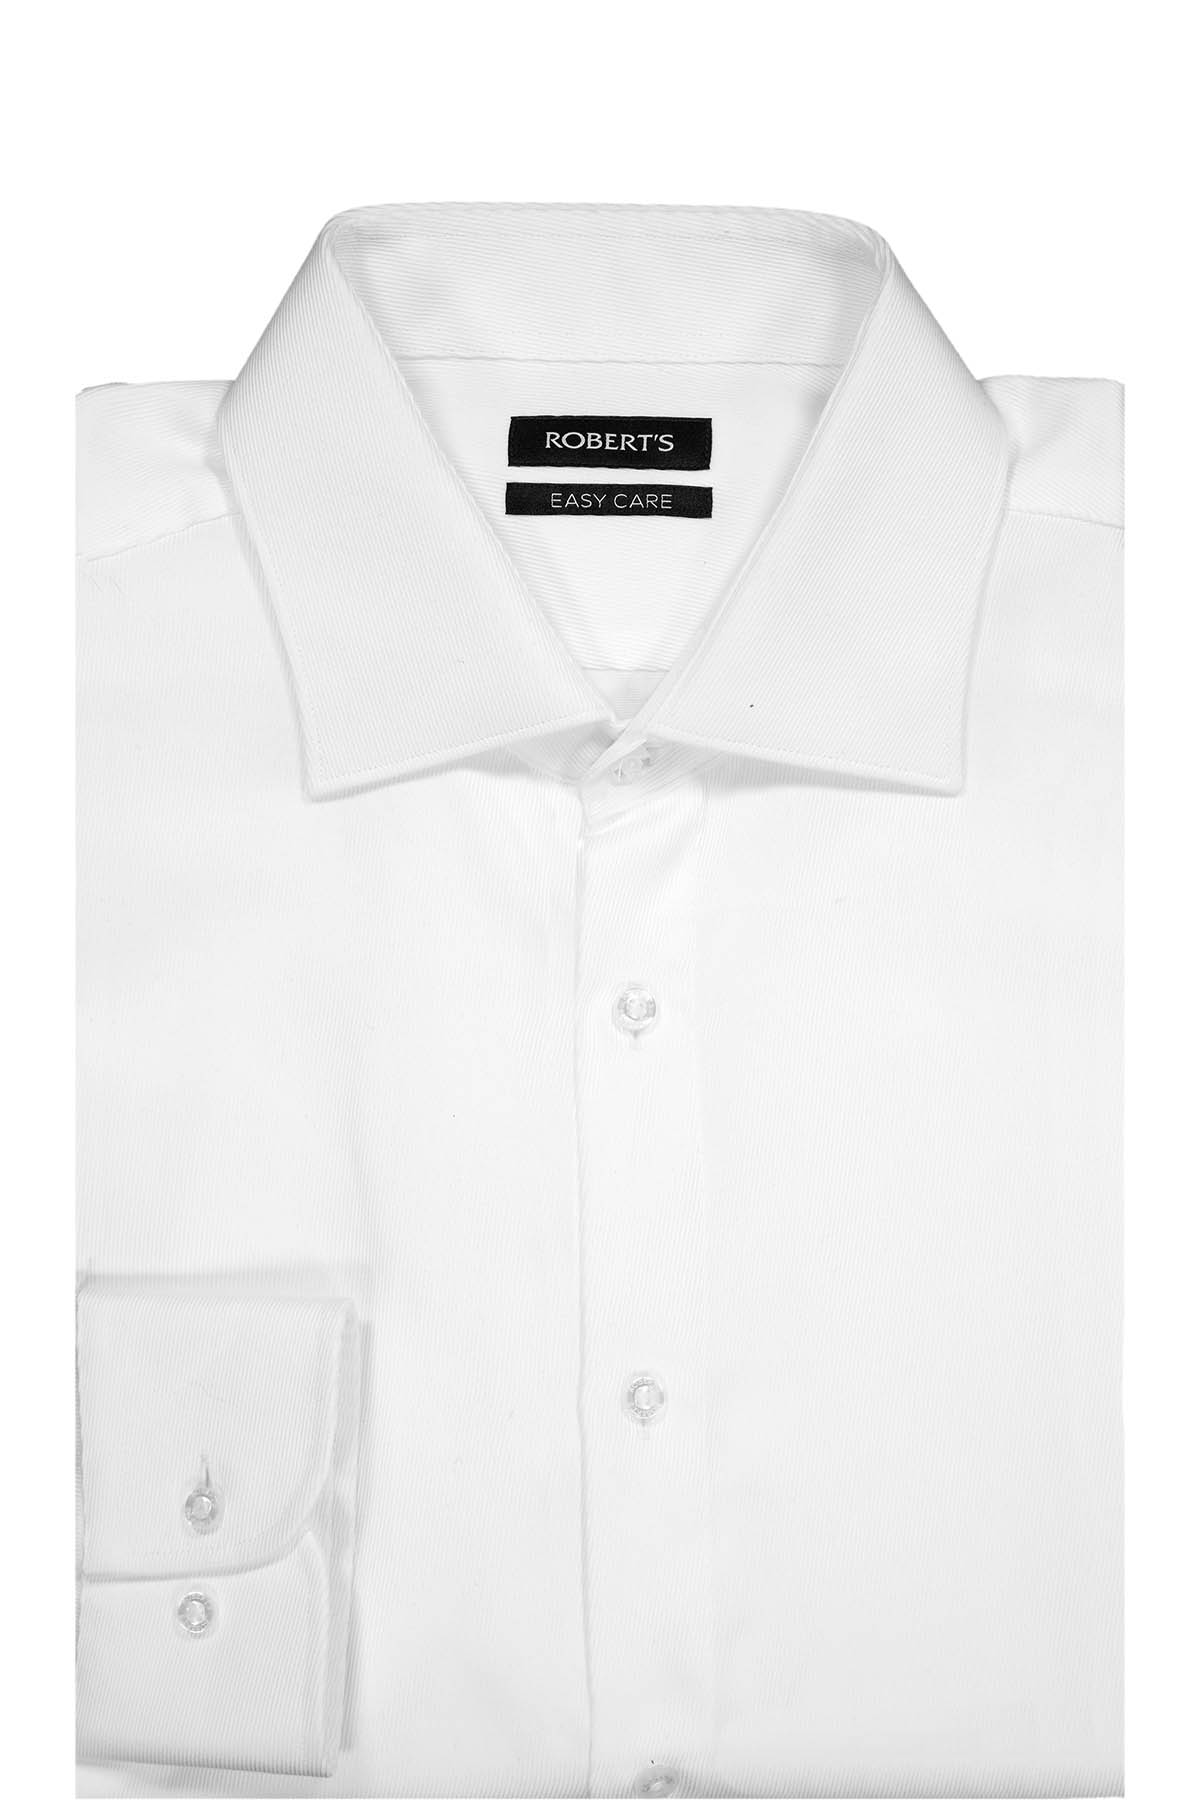 Camisa Formal Roberts Easy Care Contemporary Fit Color Blanco image number 0